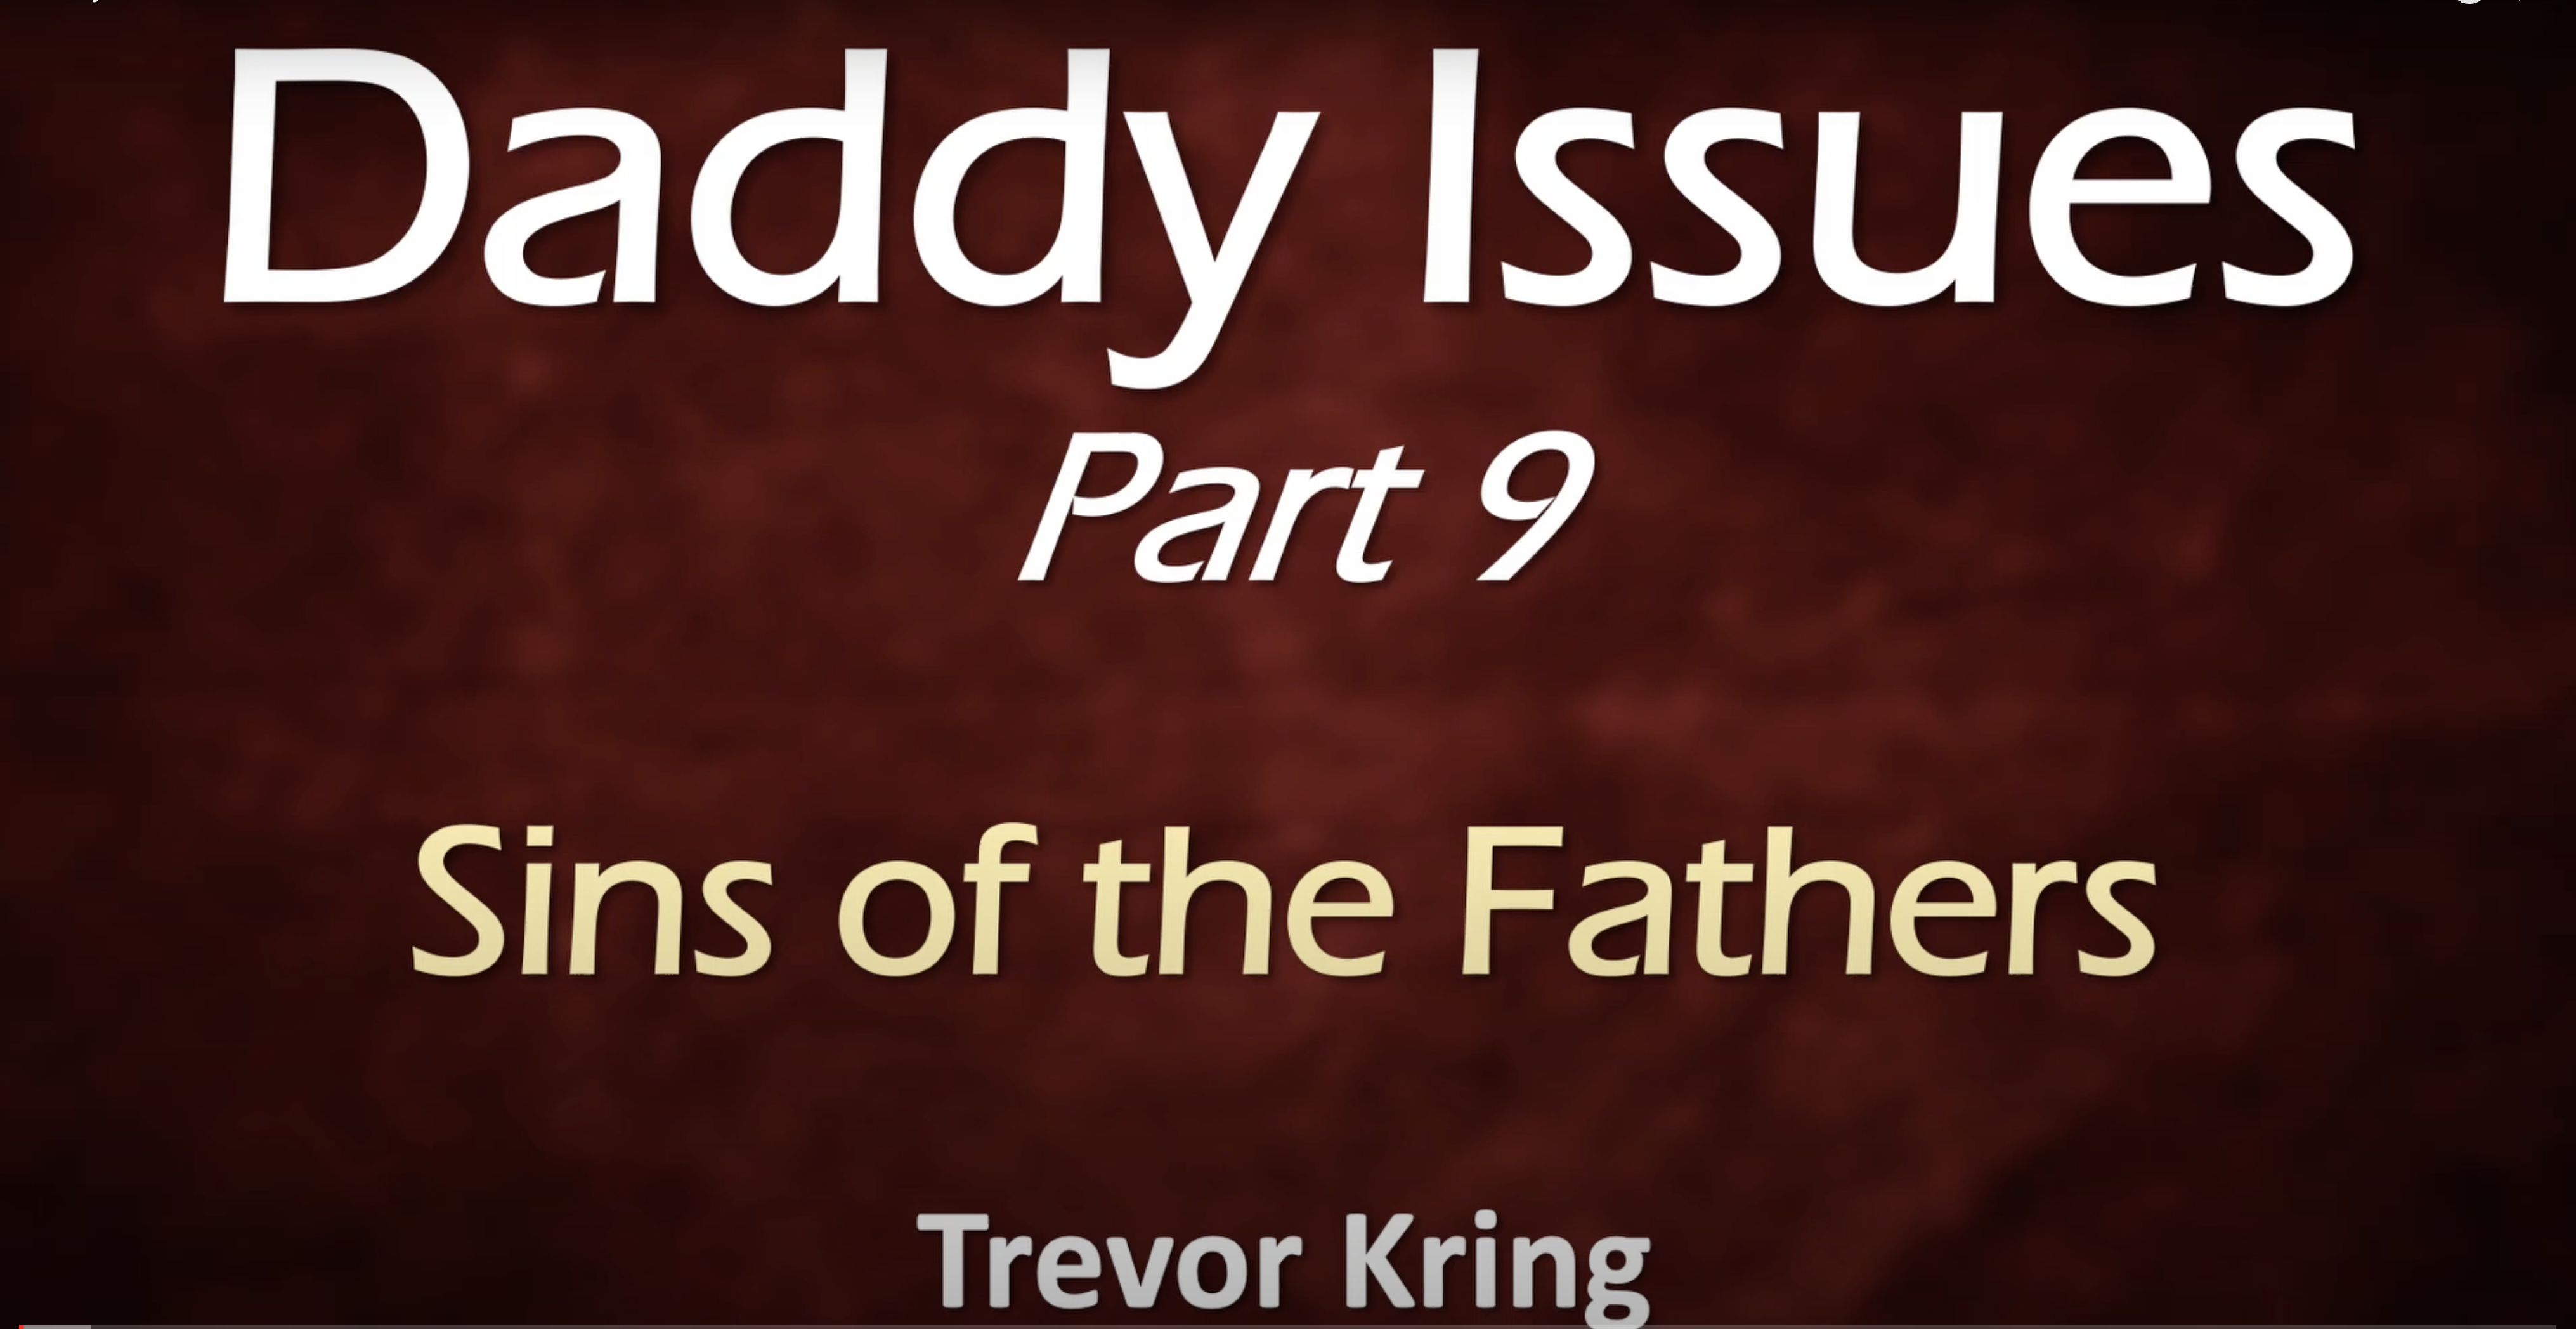 Daddy Issues Part 9- Sins of the Fathers